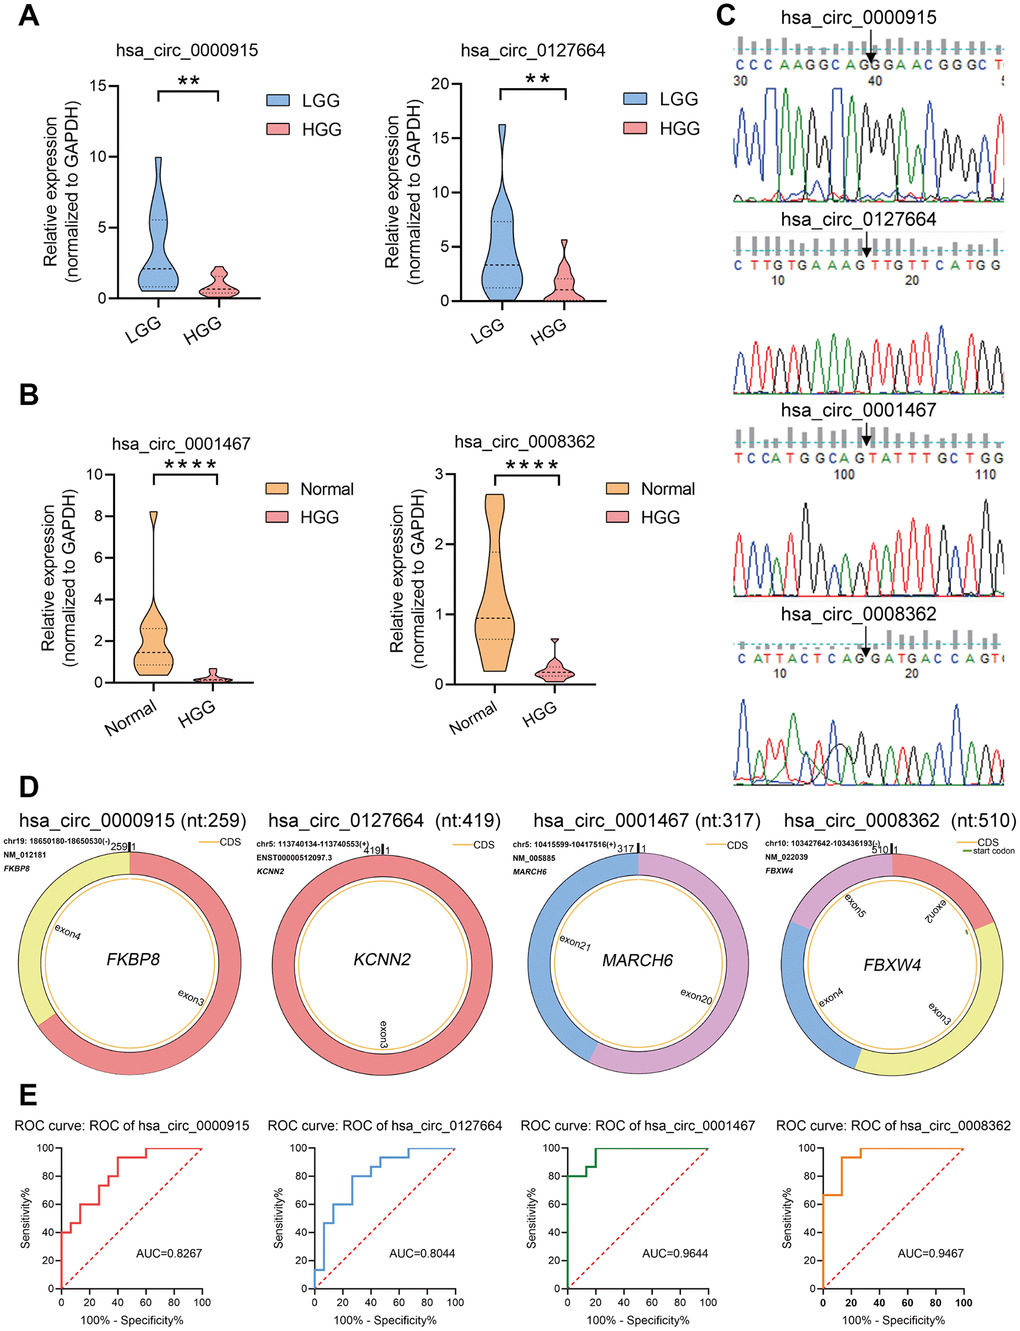 Verification of circRNA expression using qRT-PCR. (A, B) To confirm the downregulation of four circRNAs observed in circRNA-seq data, hsa